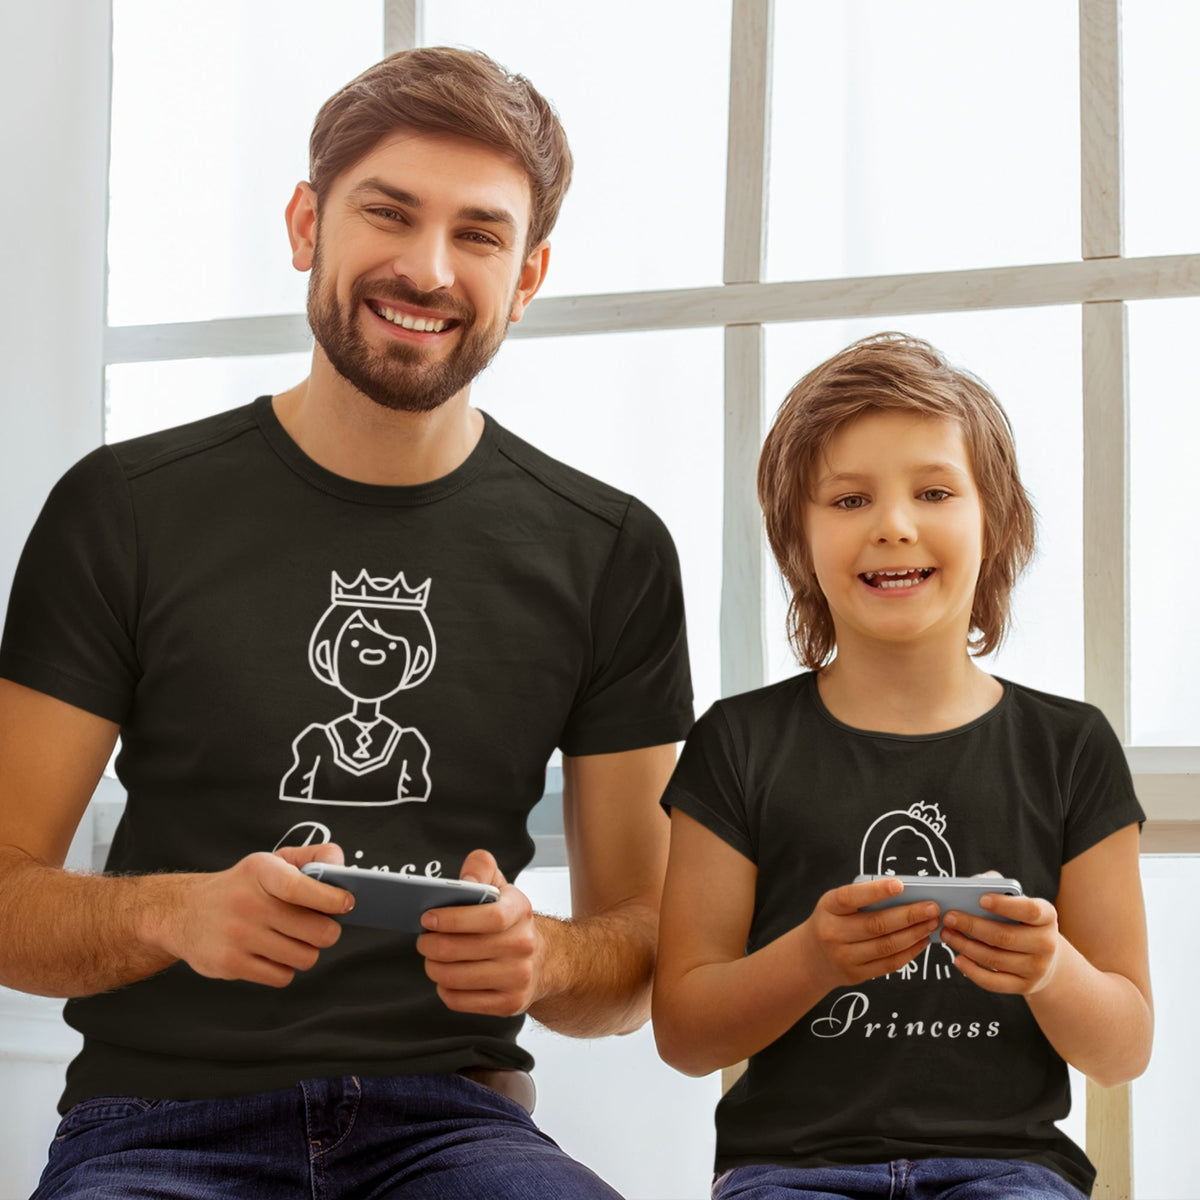 queen-prince-princess-matching-family-black-t-shirts-for-mom-dad-daughter-gogirgit-com